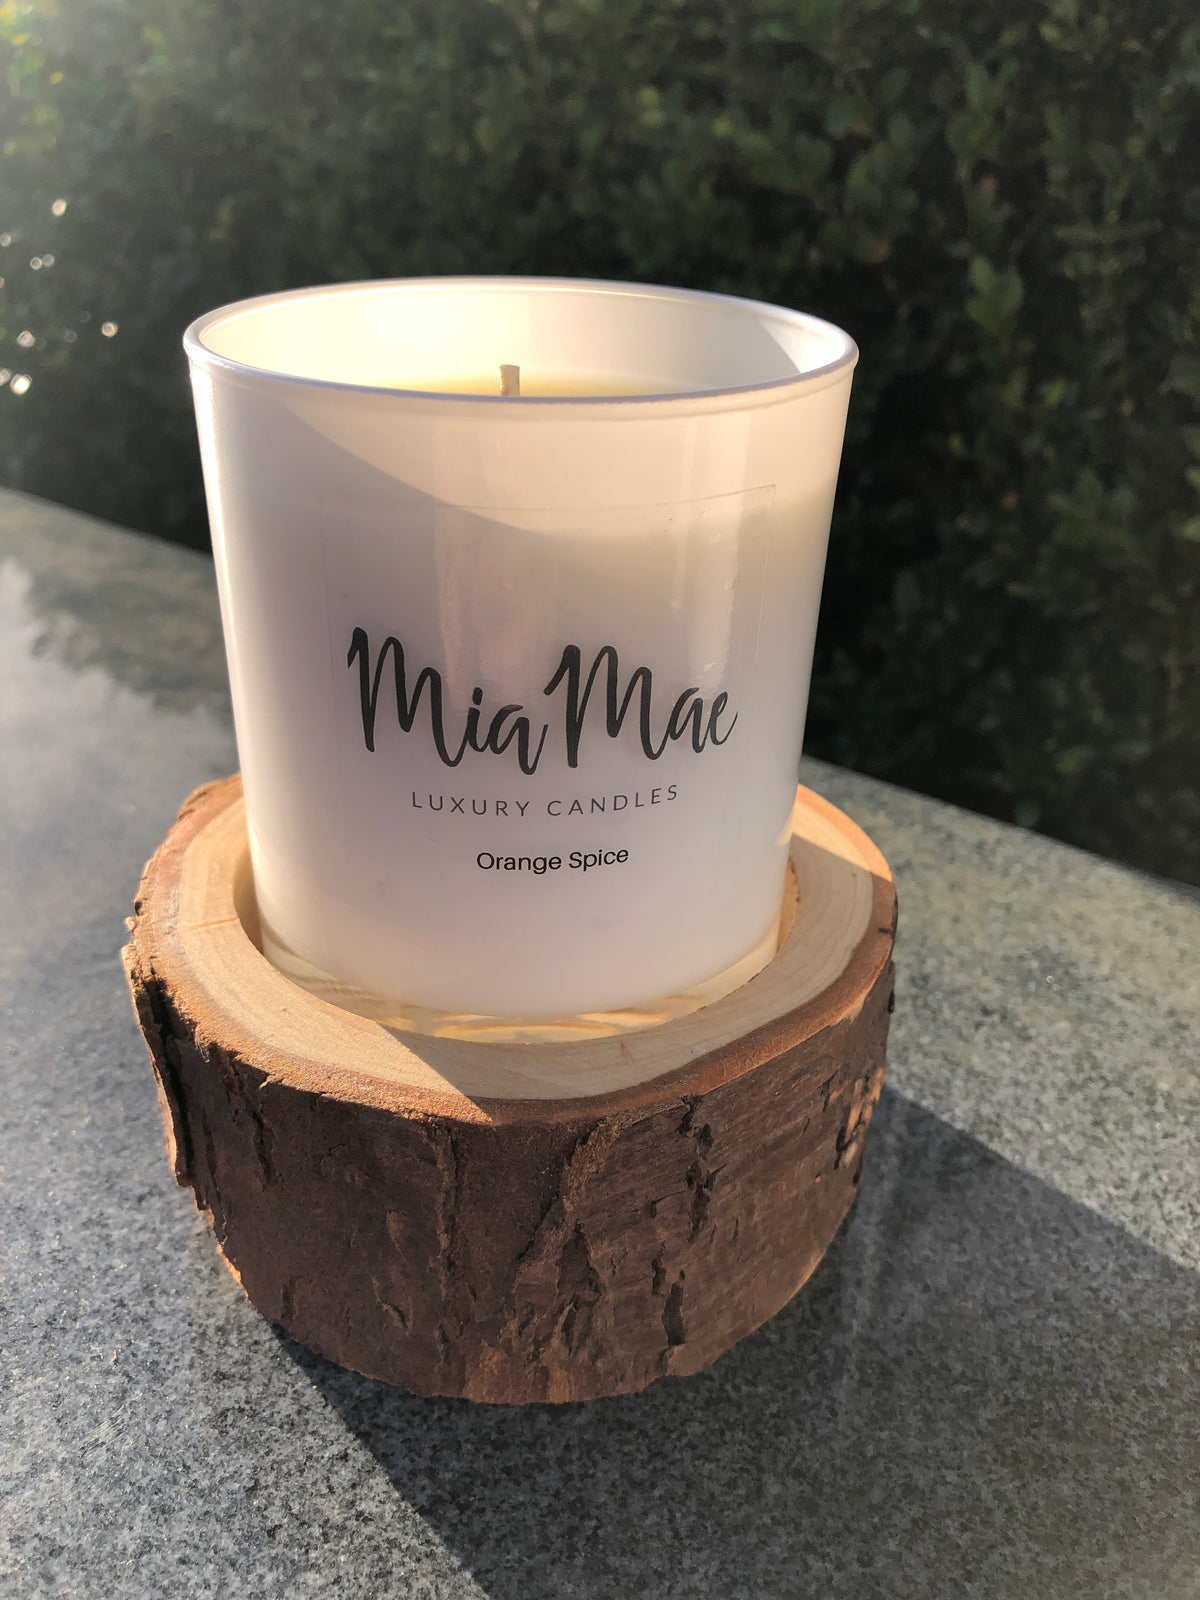 Orange spice Soy Wax Candle